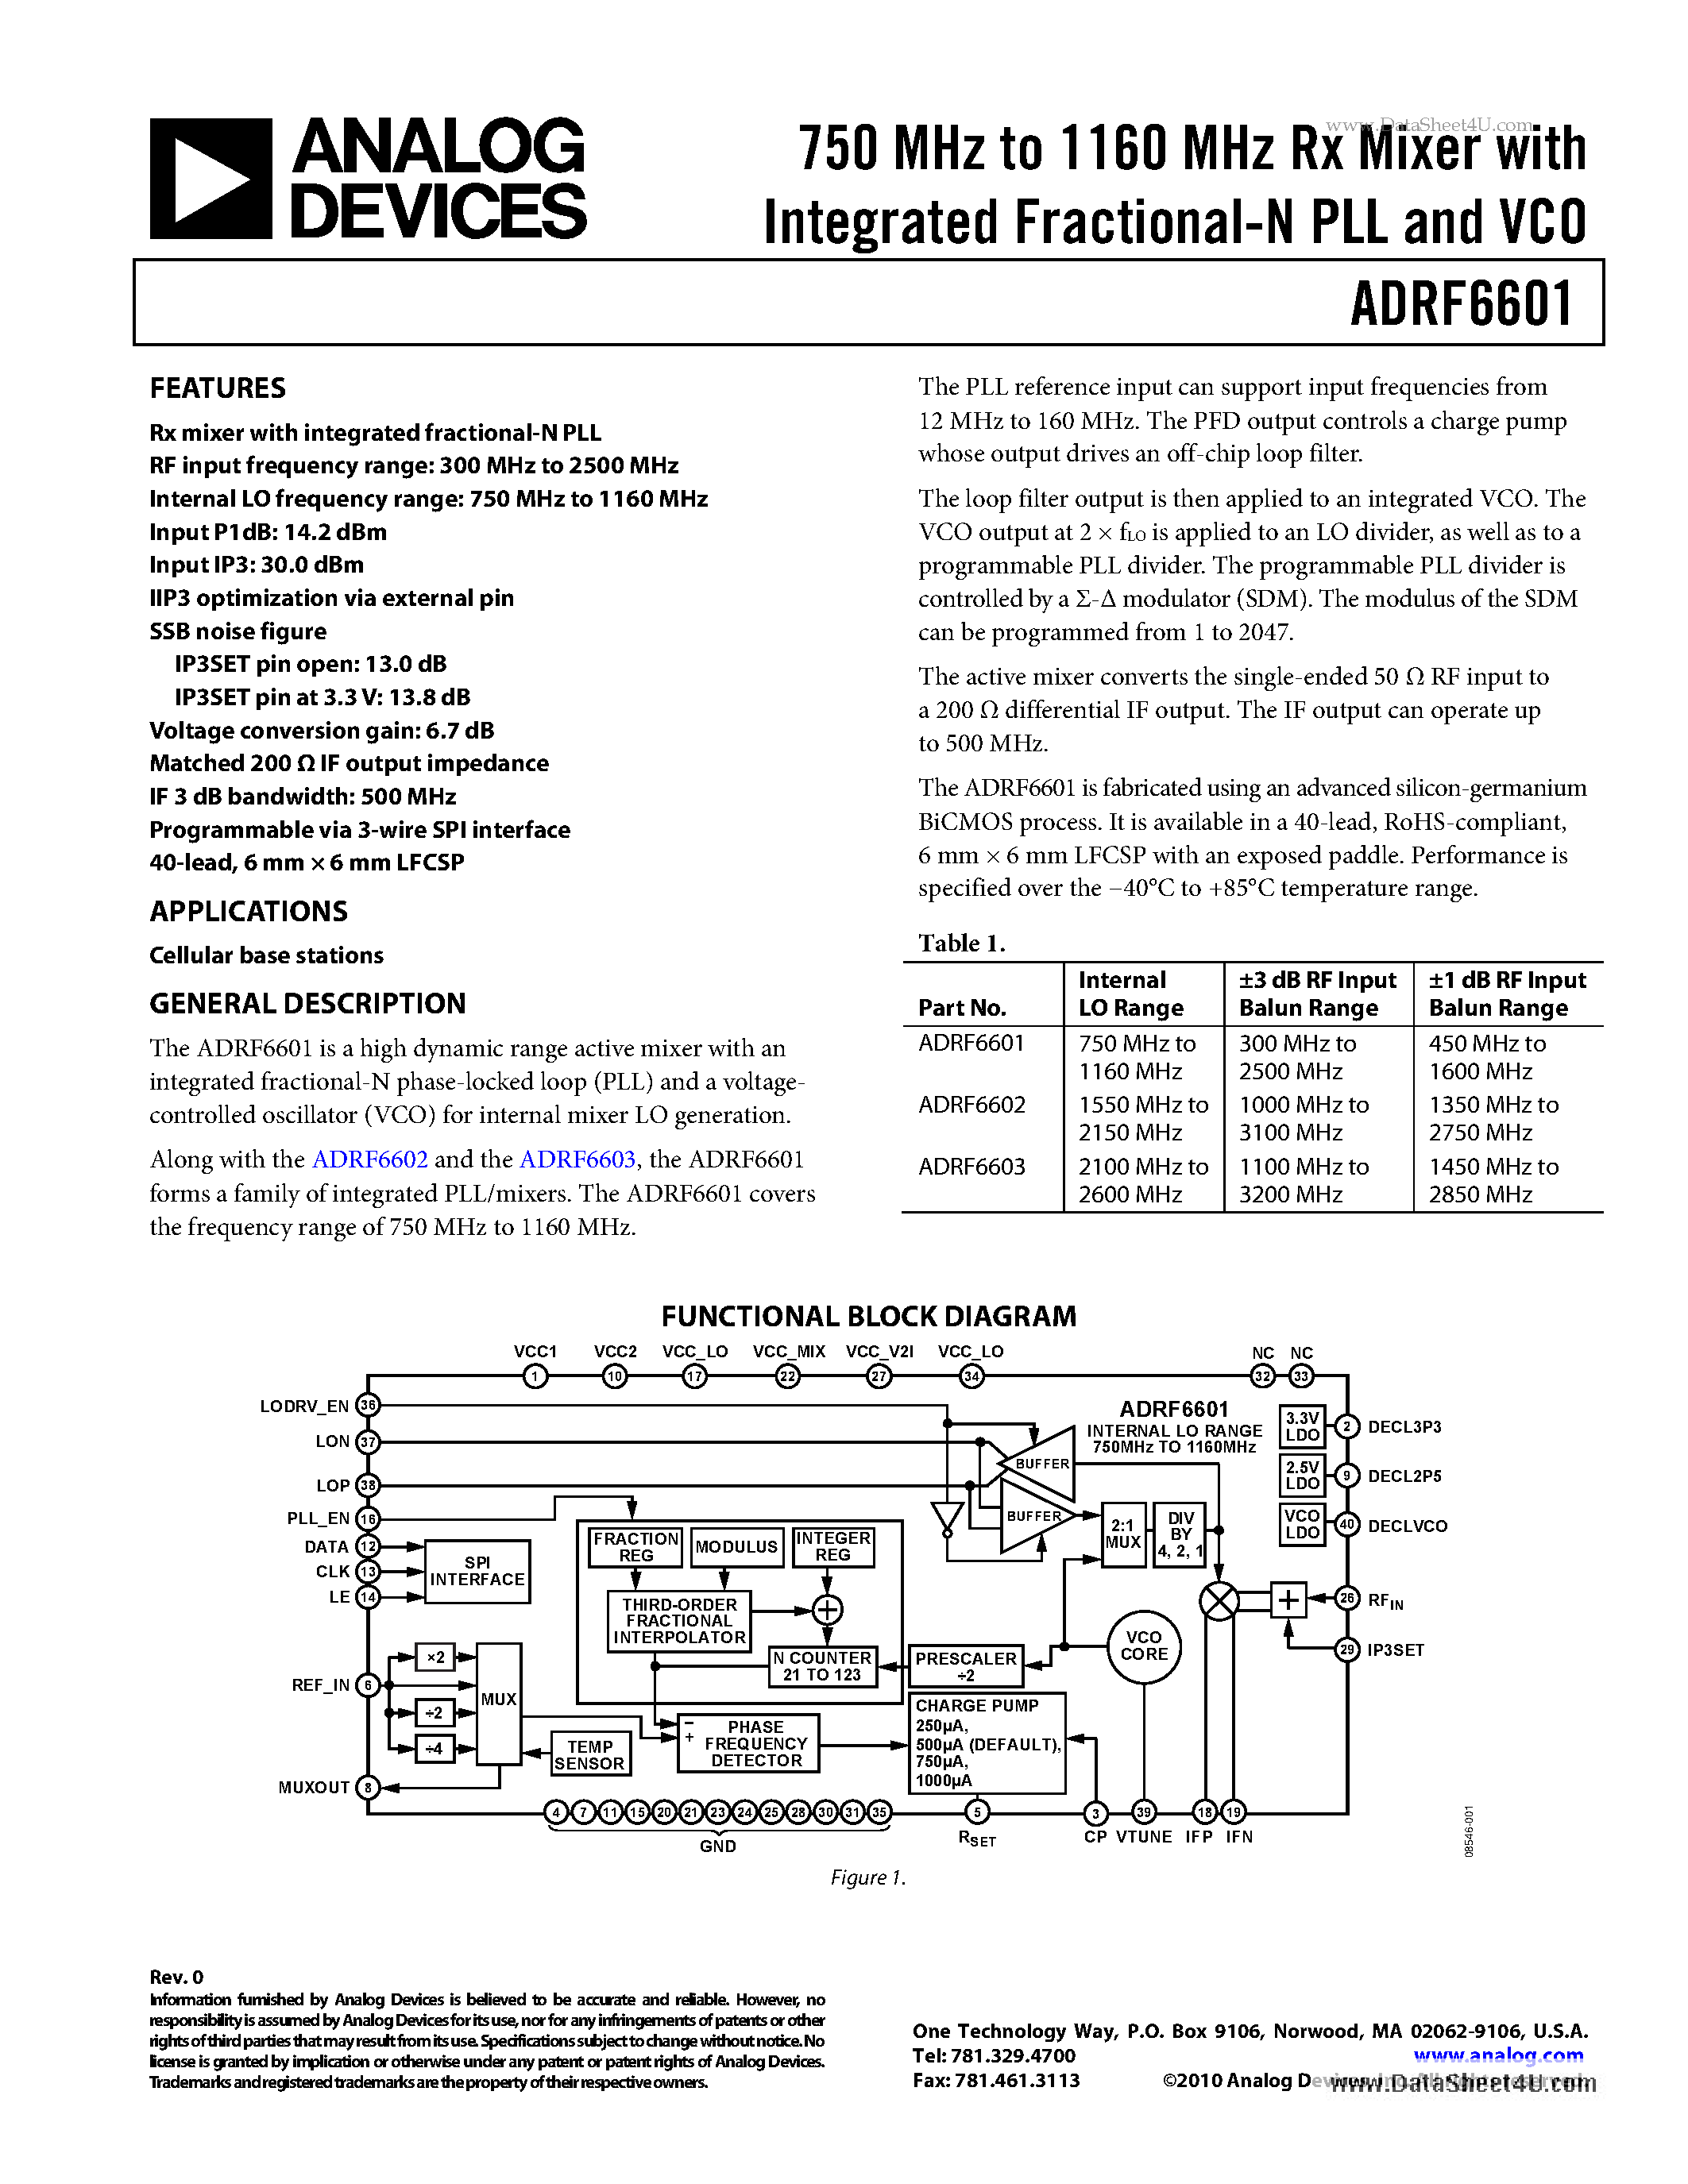 Datasheet ADRF6601 - 750 MHz to 1160 MHz Rx Mixer page 1